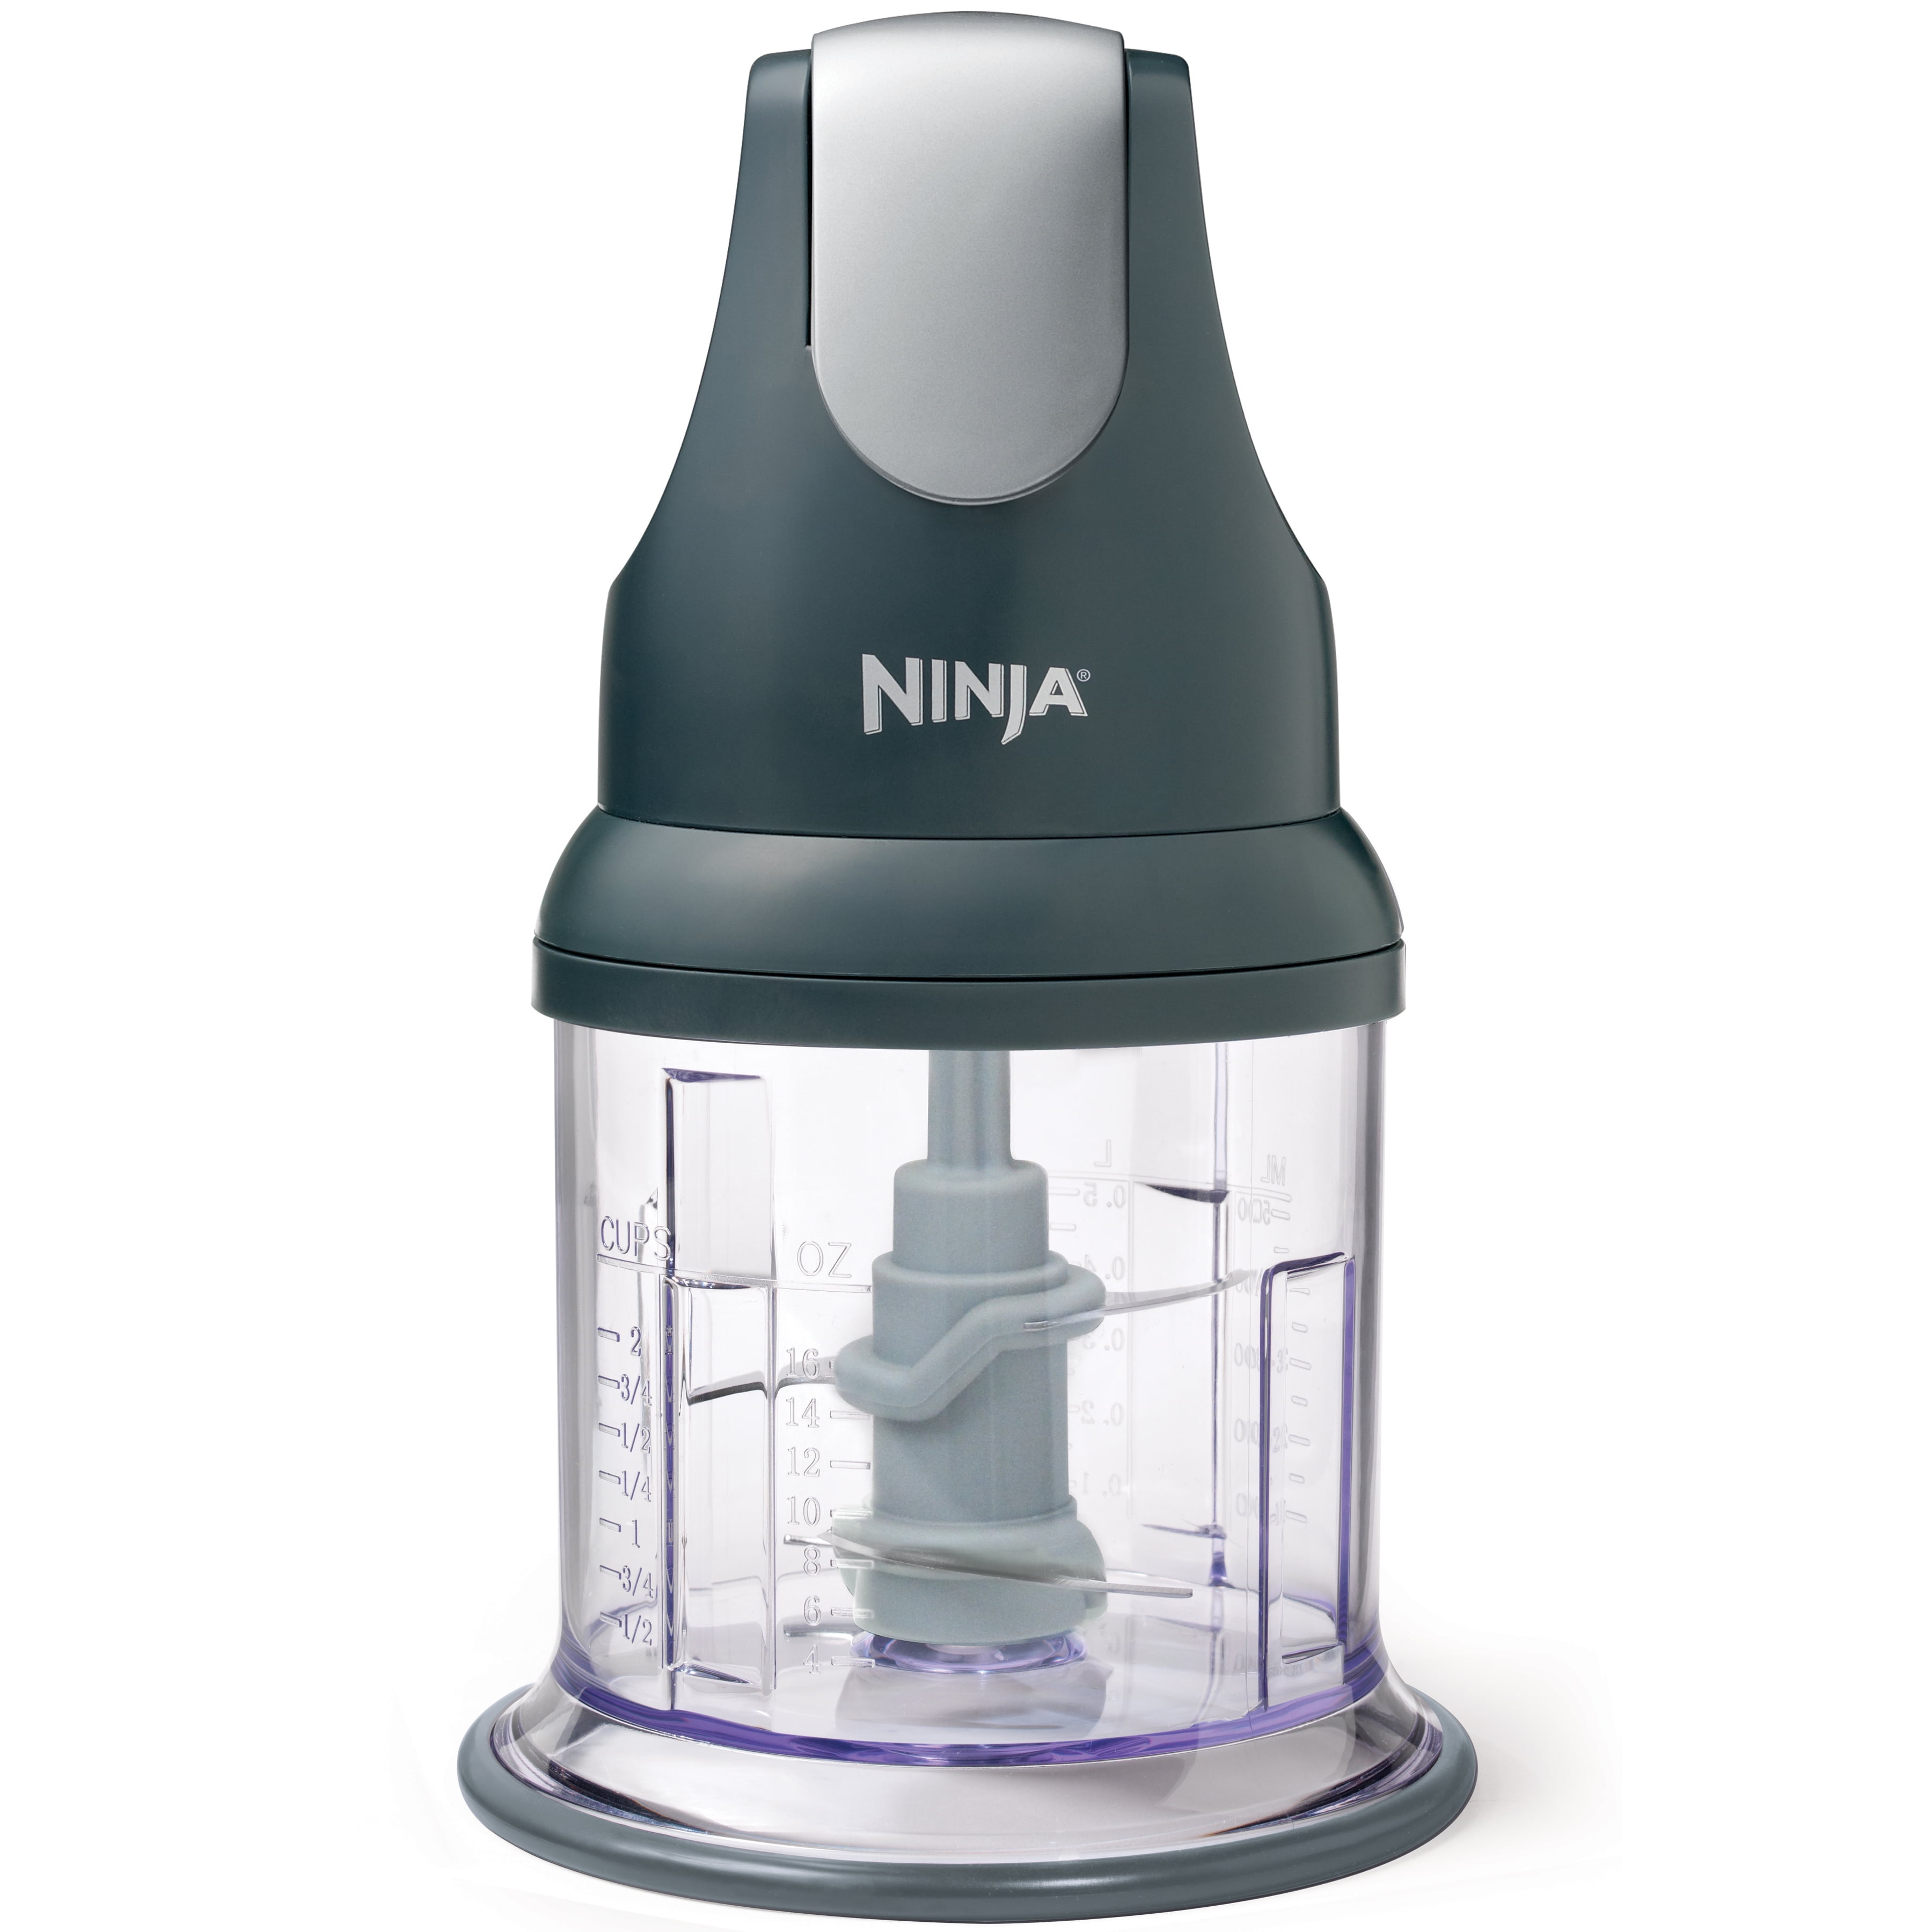 Ninja Express Chop - Chop, Mince and Puree in Seconds - Model